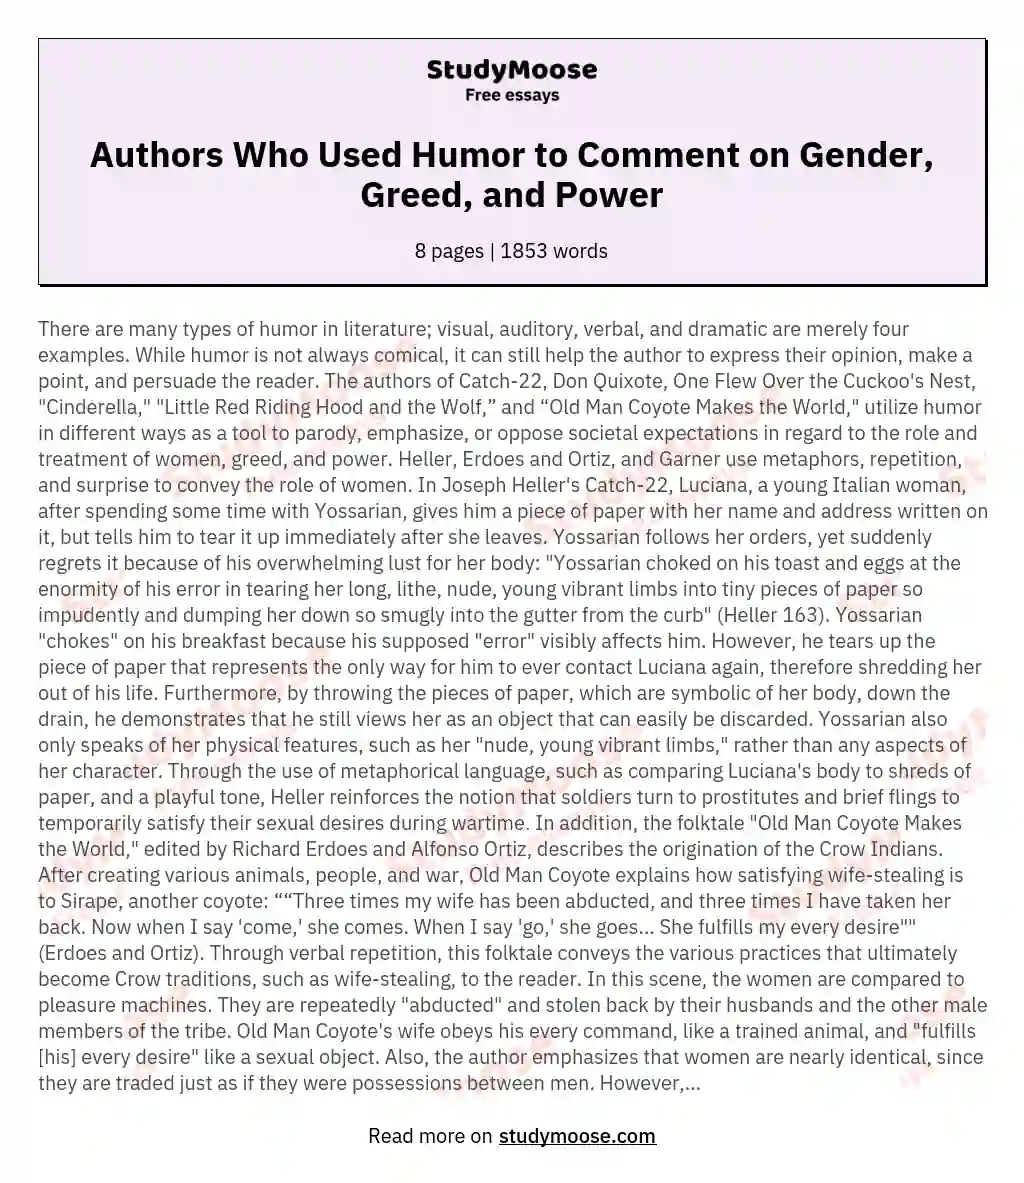 Authors Who Used Humor to Comment on Gender, Greed, and Power essay